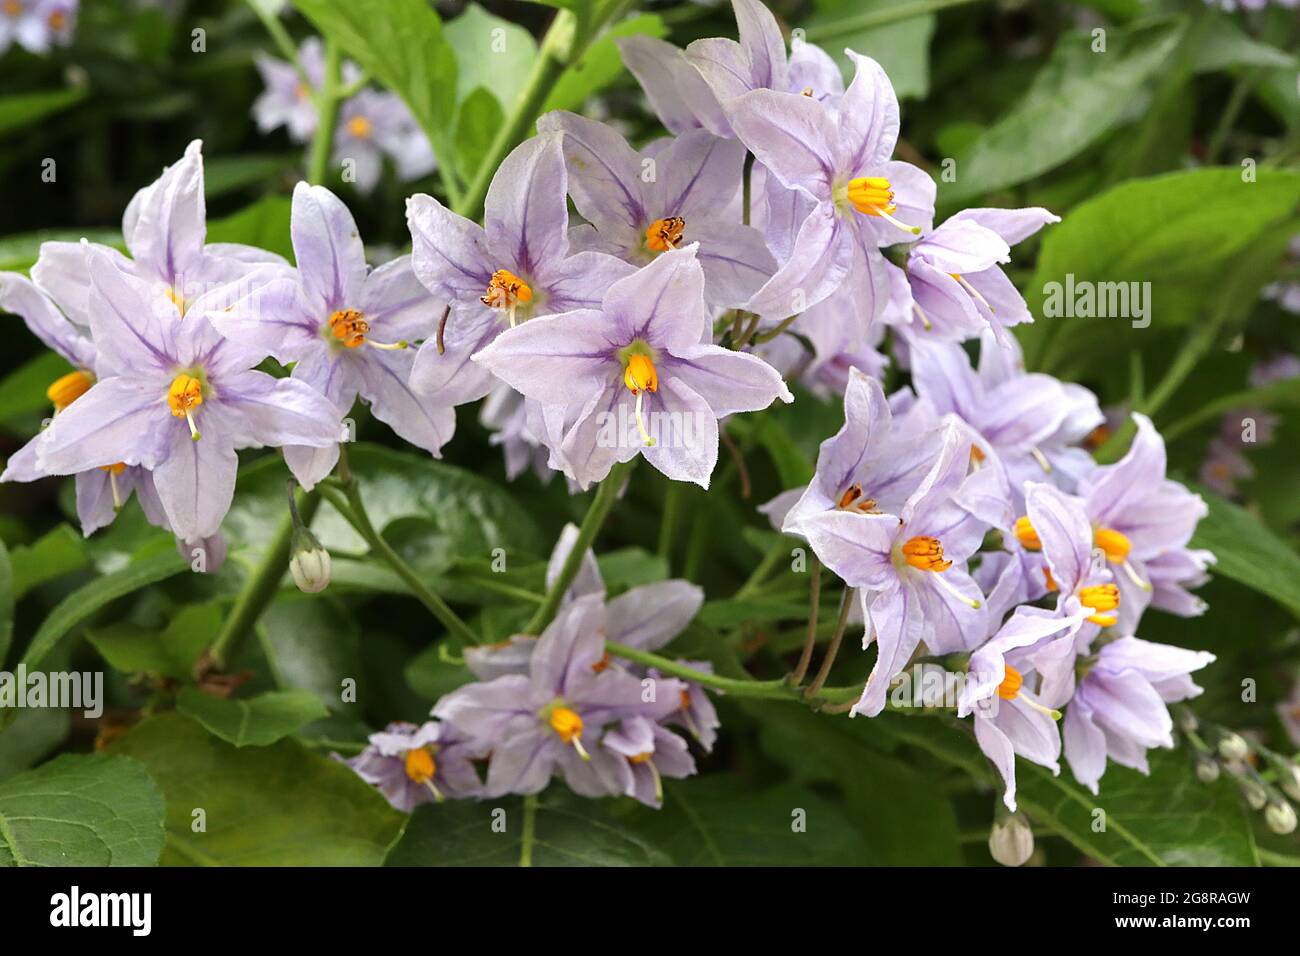 Solanum crispum ‘Glasnevin’ potato tree Glasnevin – clusters of lavender mauve star-shaped flowers with fused yellow stamens, May, England, UK Stock Photo